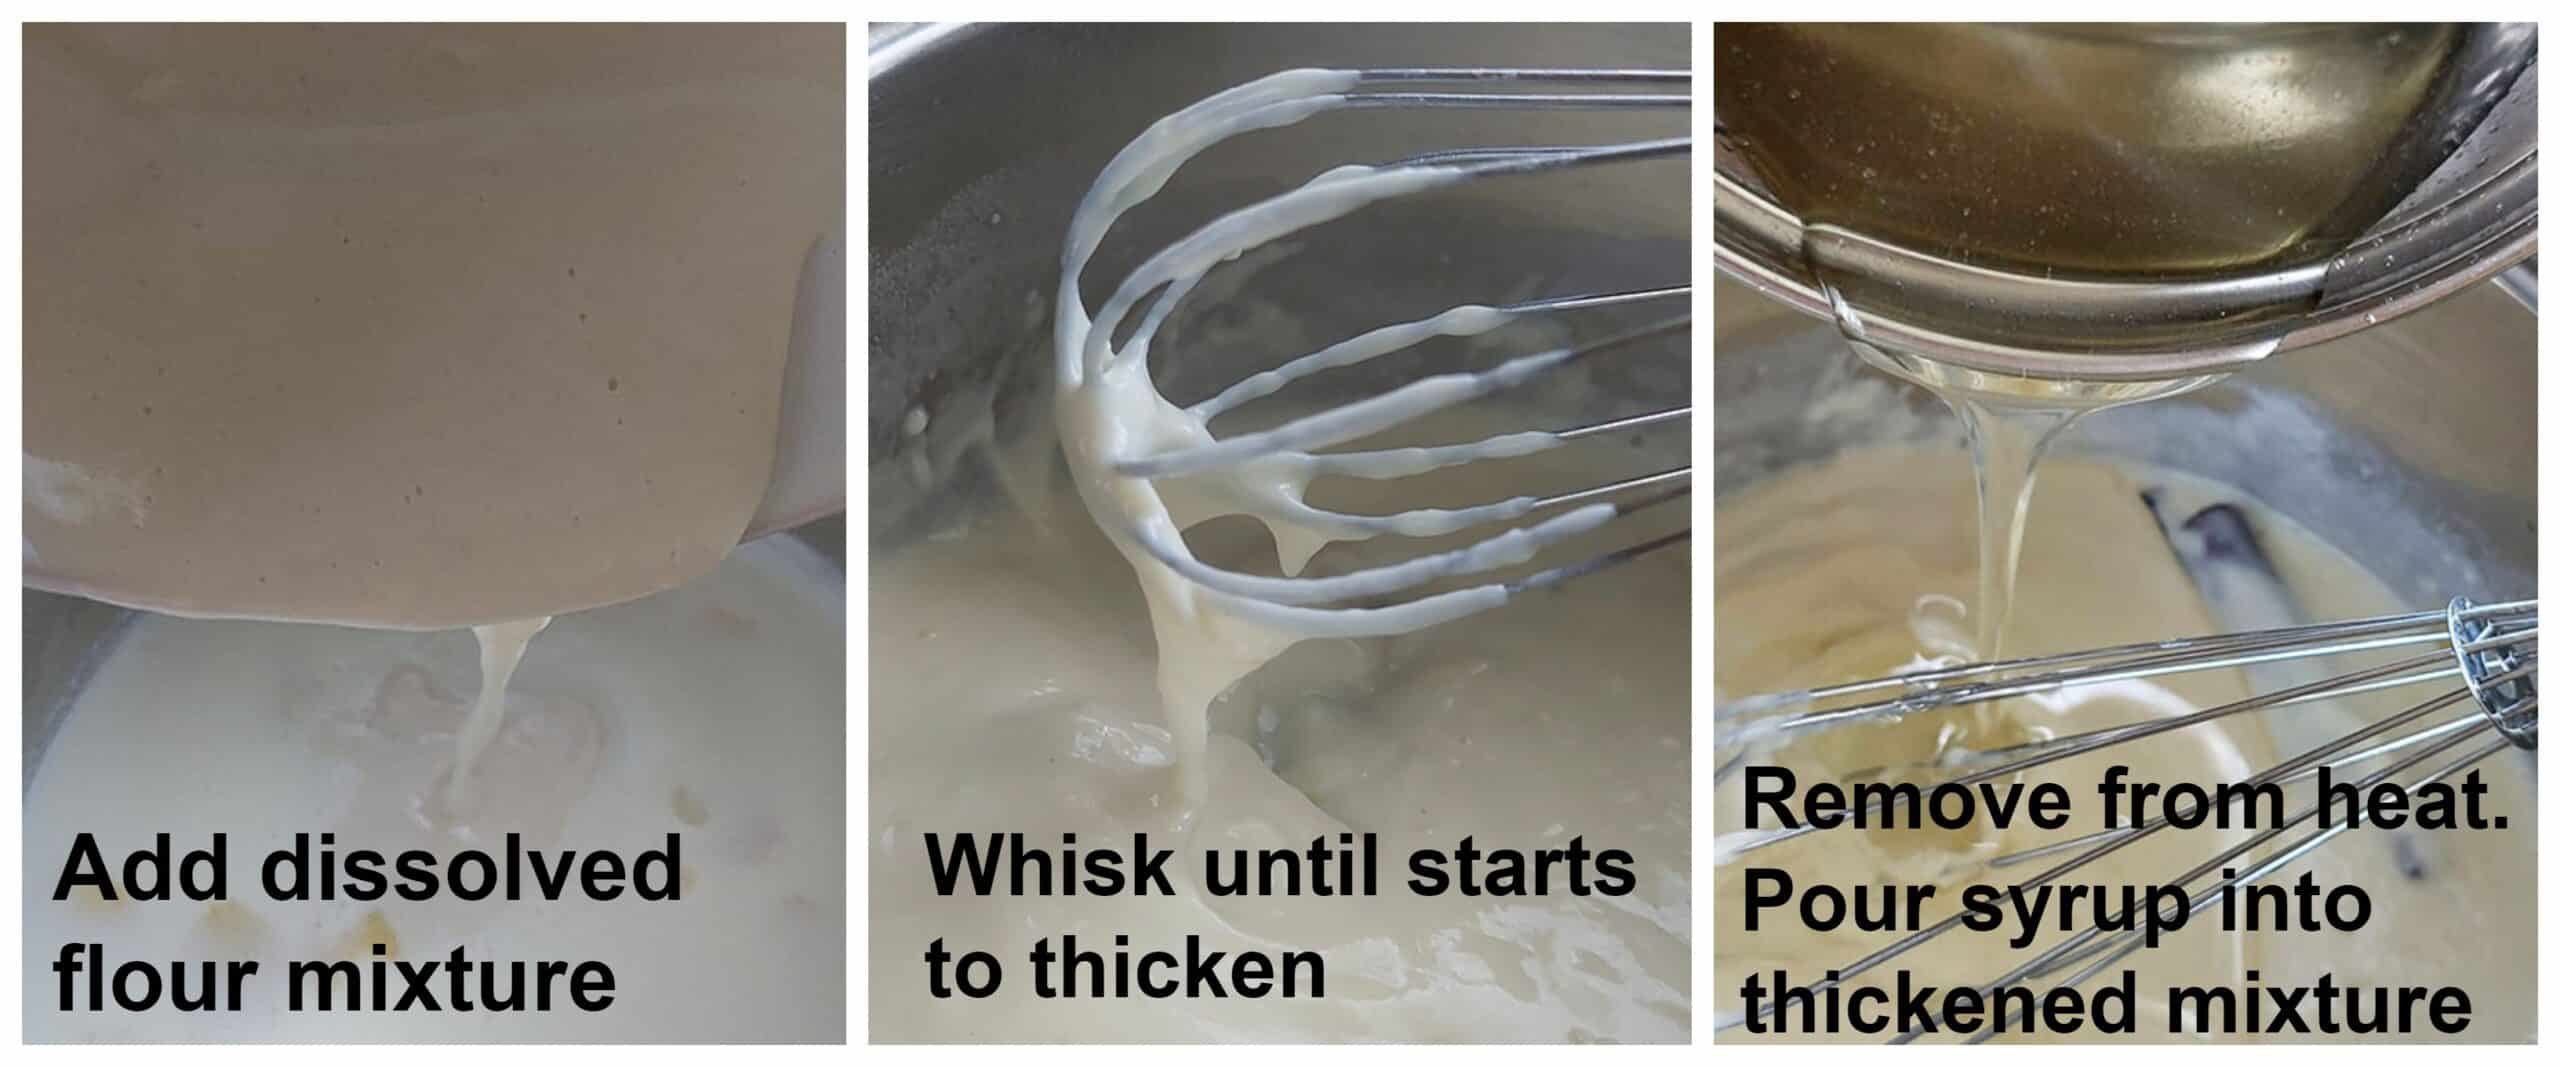 The milk and flour mixture